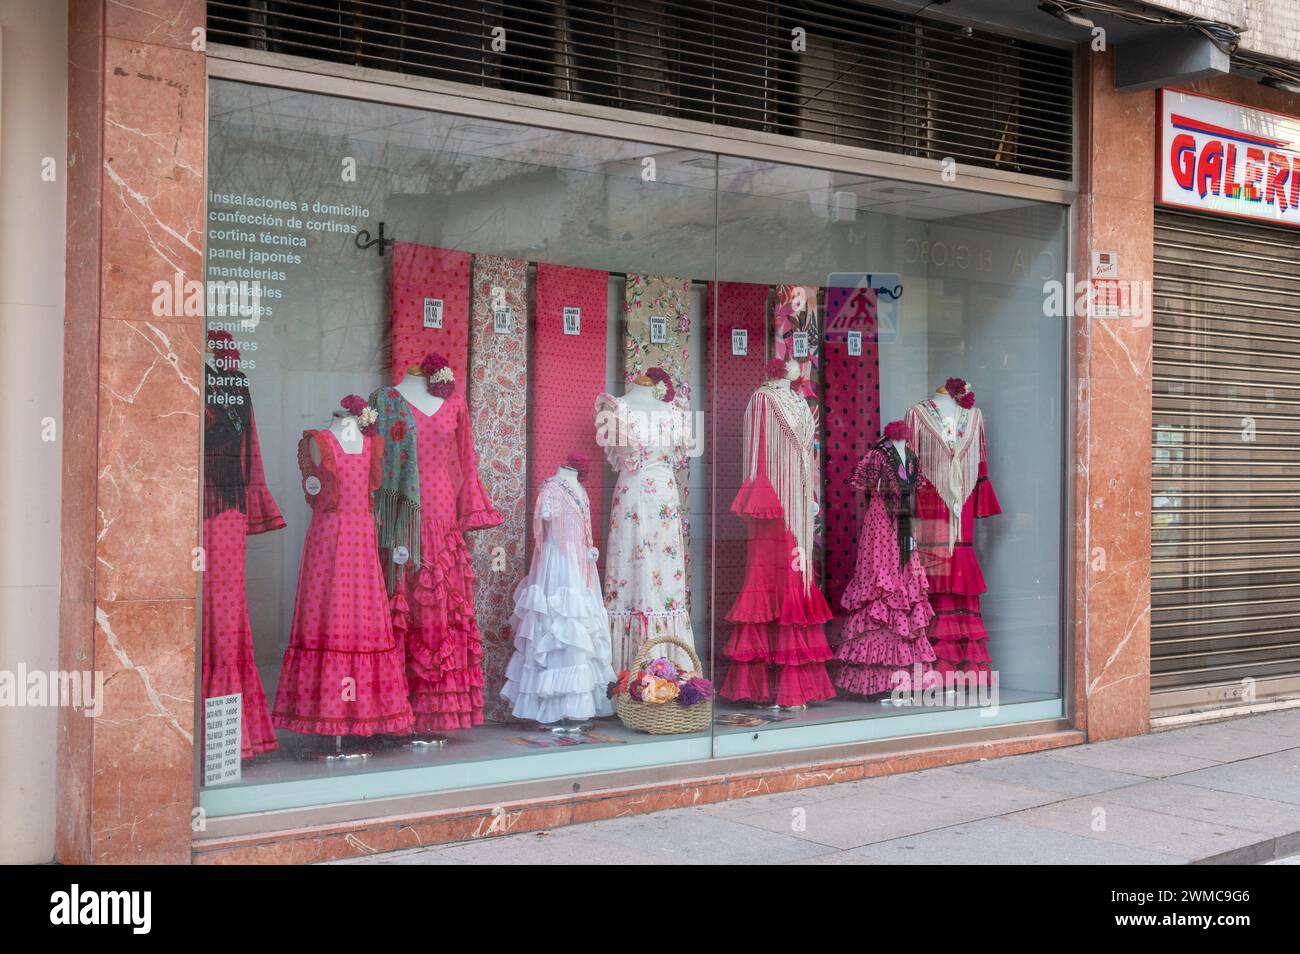 A Flamenco dress shop in Cordoba in Andalusia, southern Spain.  The Flamenco dress worn by women, is a traditional Spanish dress with body-hugging to Stock Photo